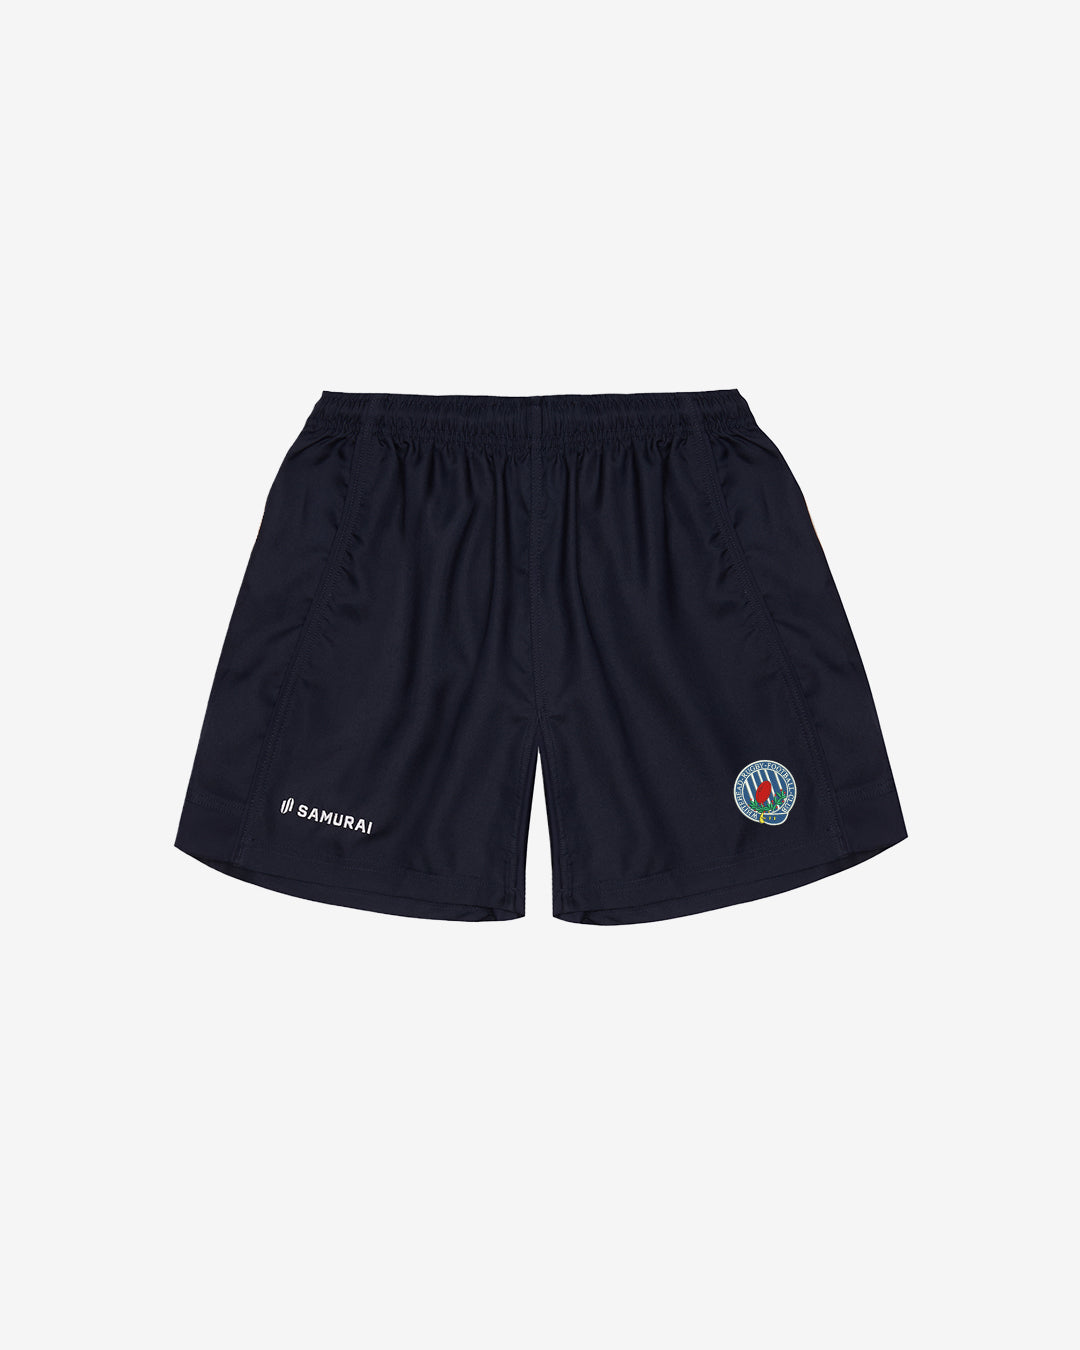 Whitehead RFC - EP:0119 - Rugby Short - Navy